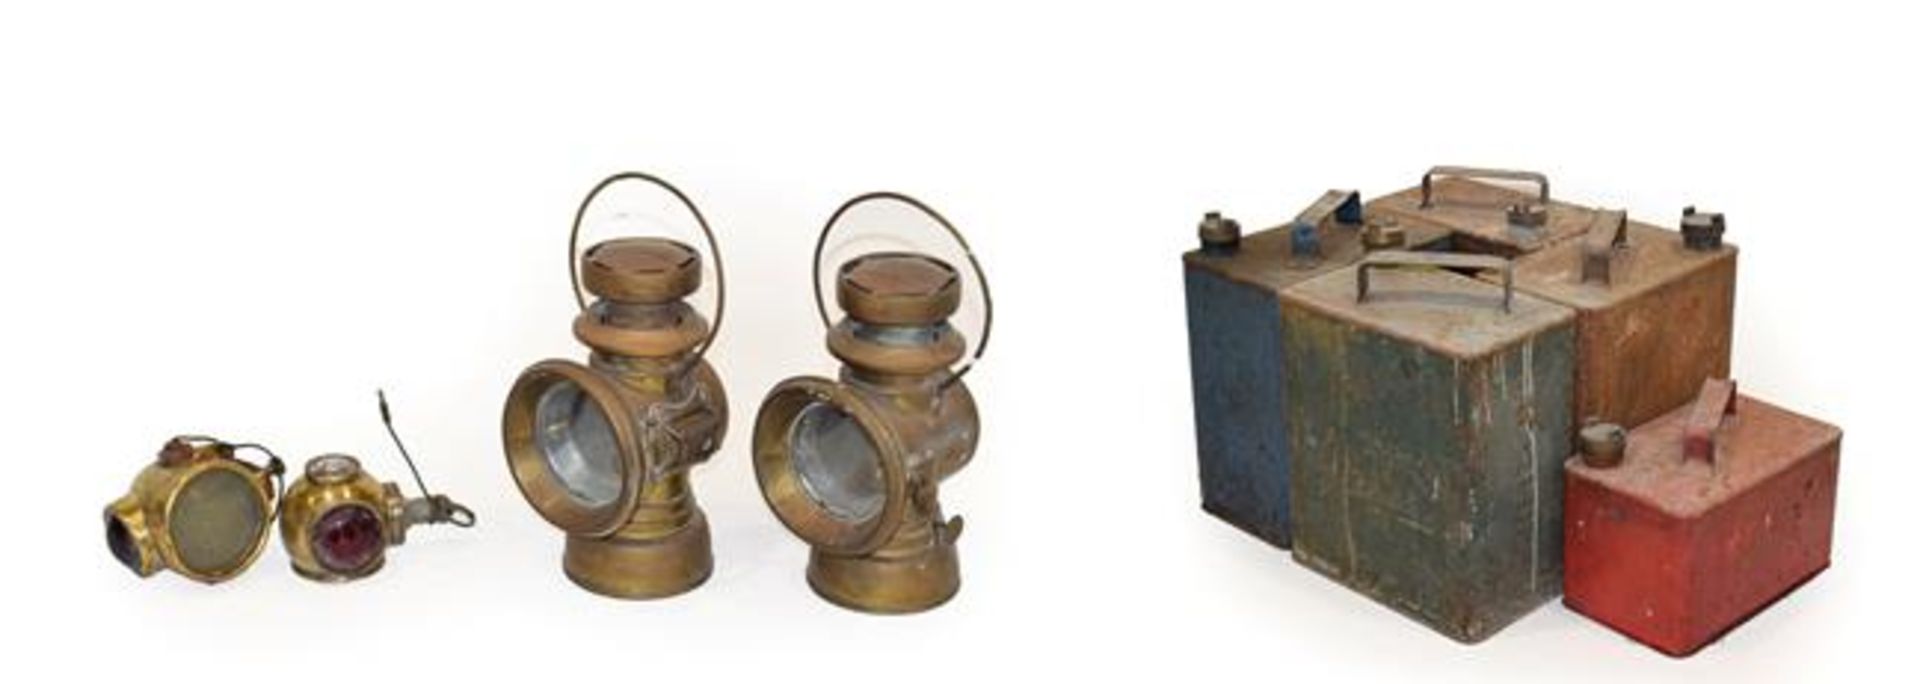 A Pair of Early 20th Century Joseph Lucas King of the Road Brass Lamps, with 3'' glass lenses,